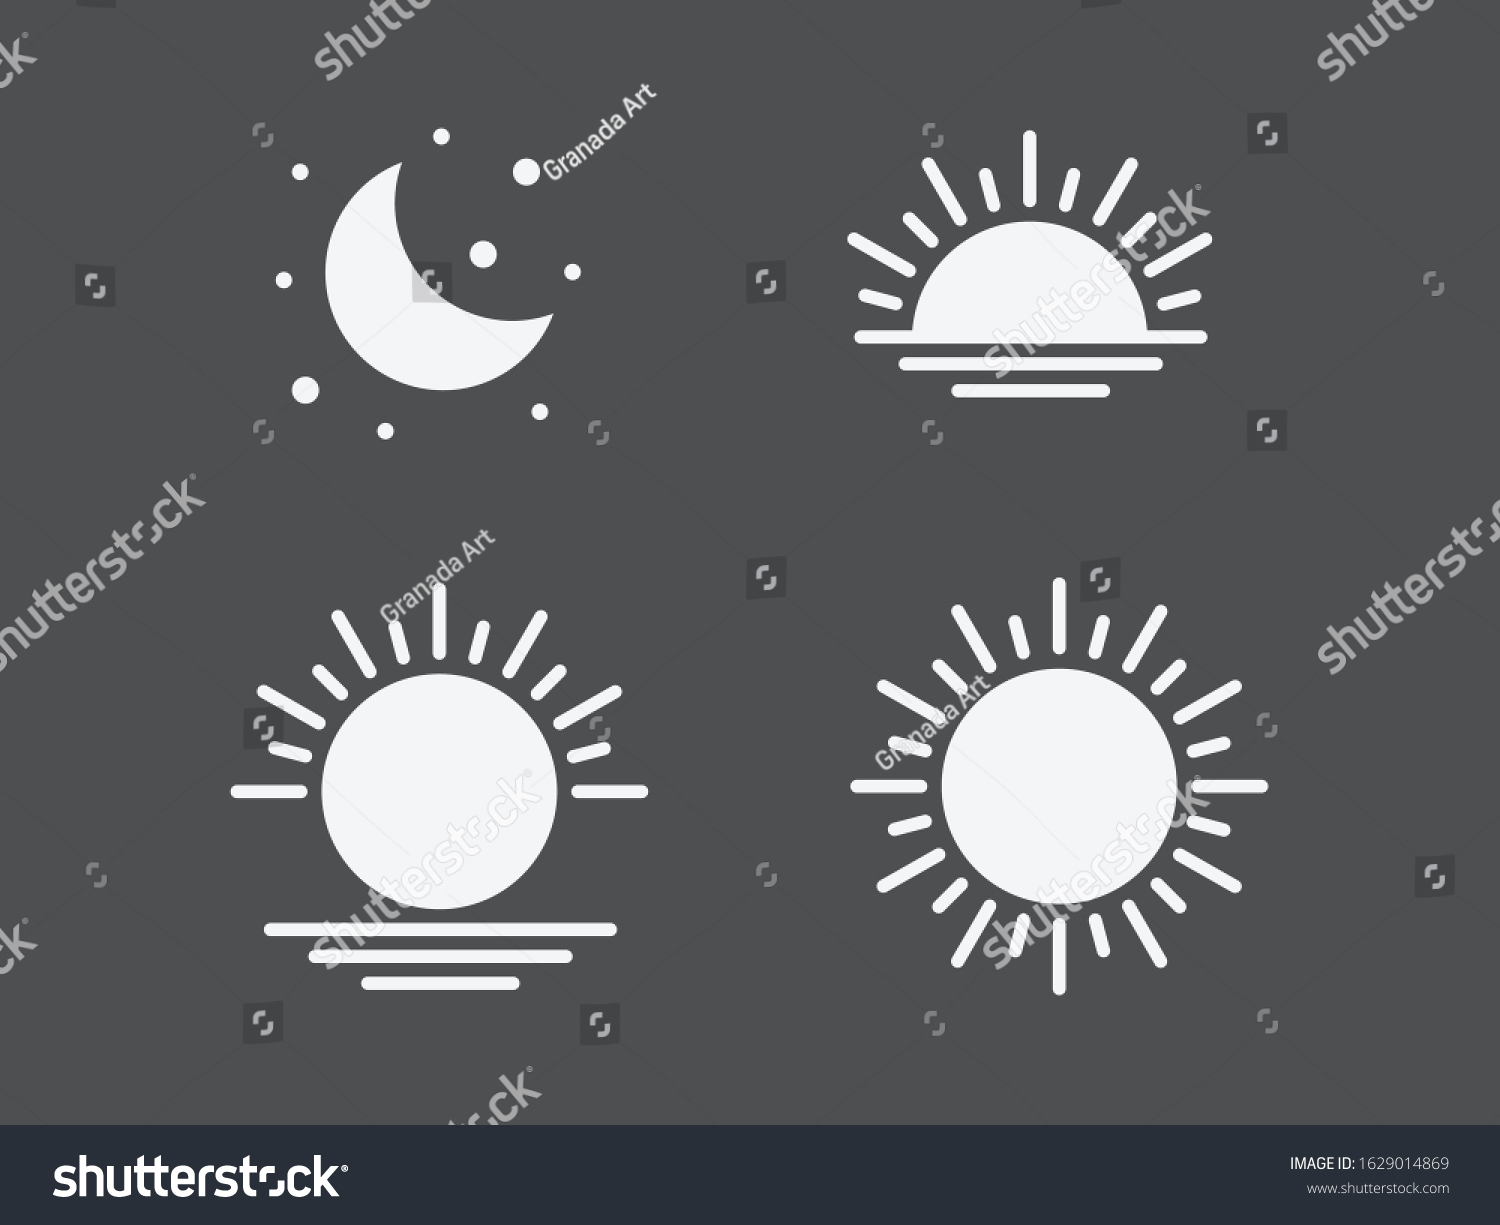 Parts Day Morning Afternoon Noon Sunset Stock Vector (Royalty Free ...